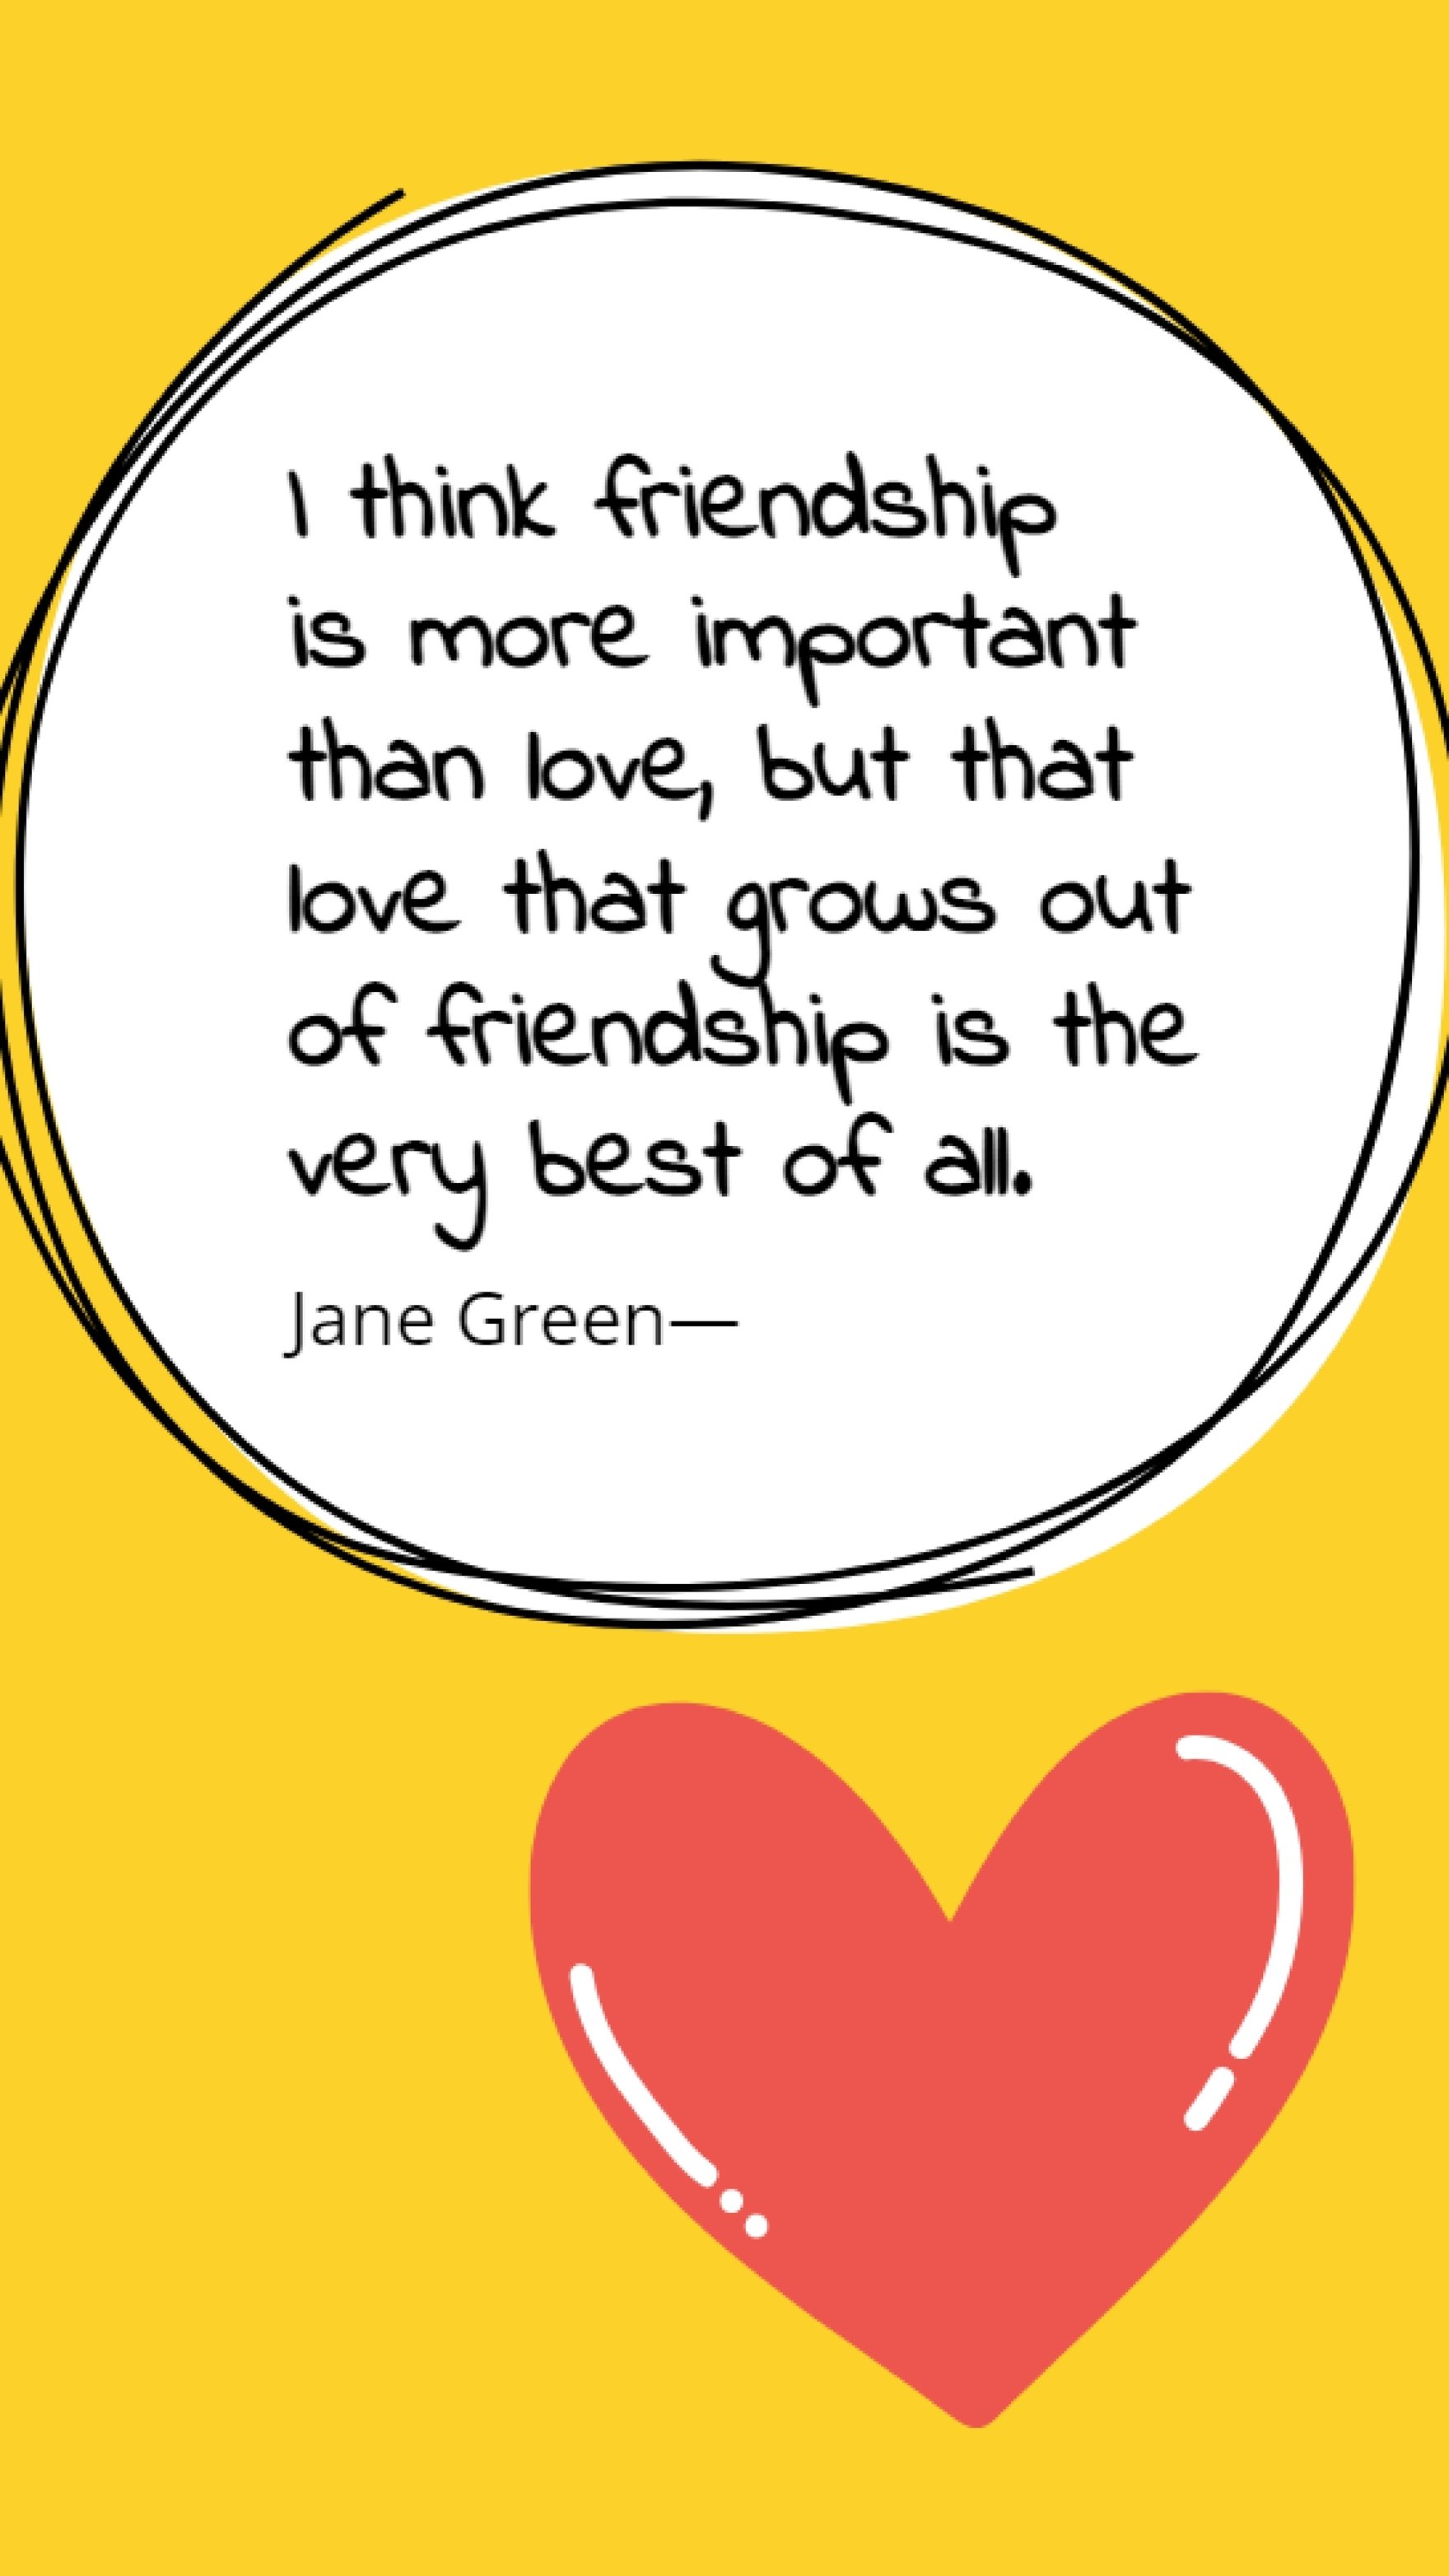 Jane Green - I think friendship is more important than love, but that love that grows out of friendship is the very best of all. Template